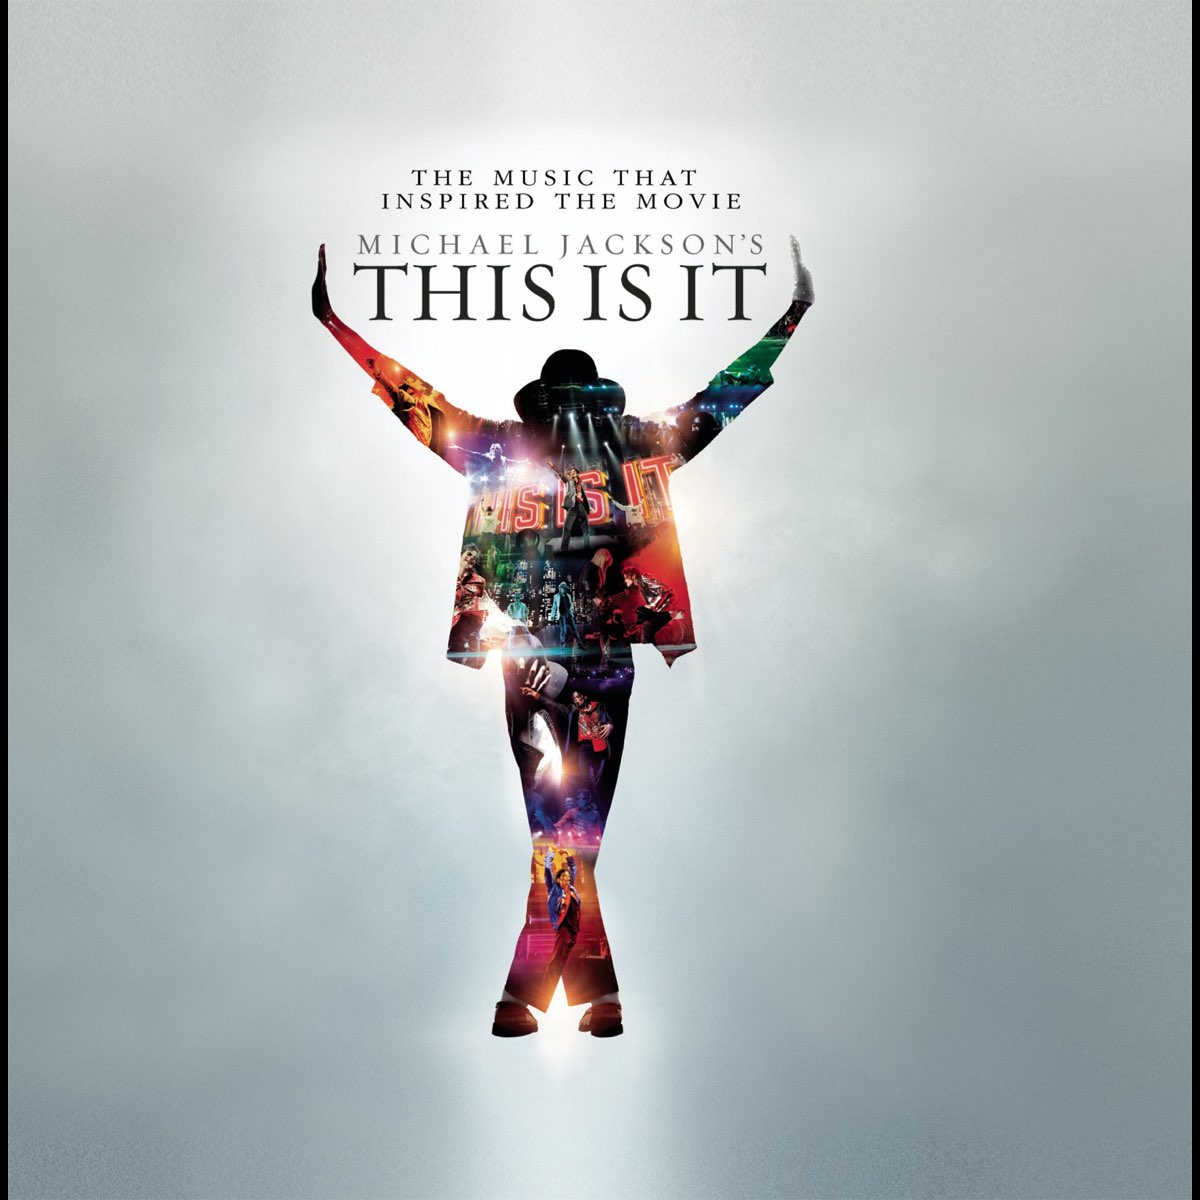 ‎Michael Jackson's This Is It (The Music That Inspired the Movie) by Michael  Jackson on Apple Music